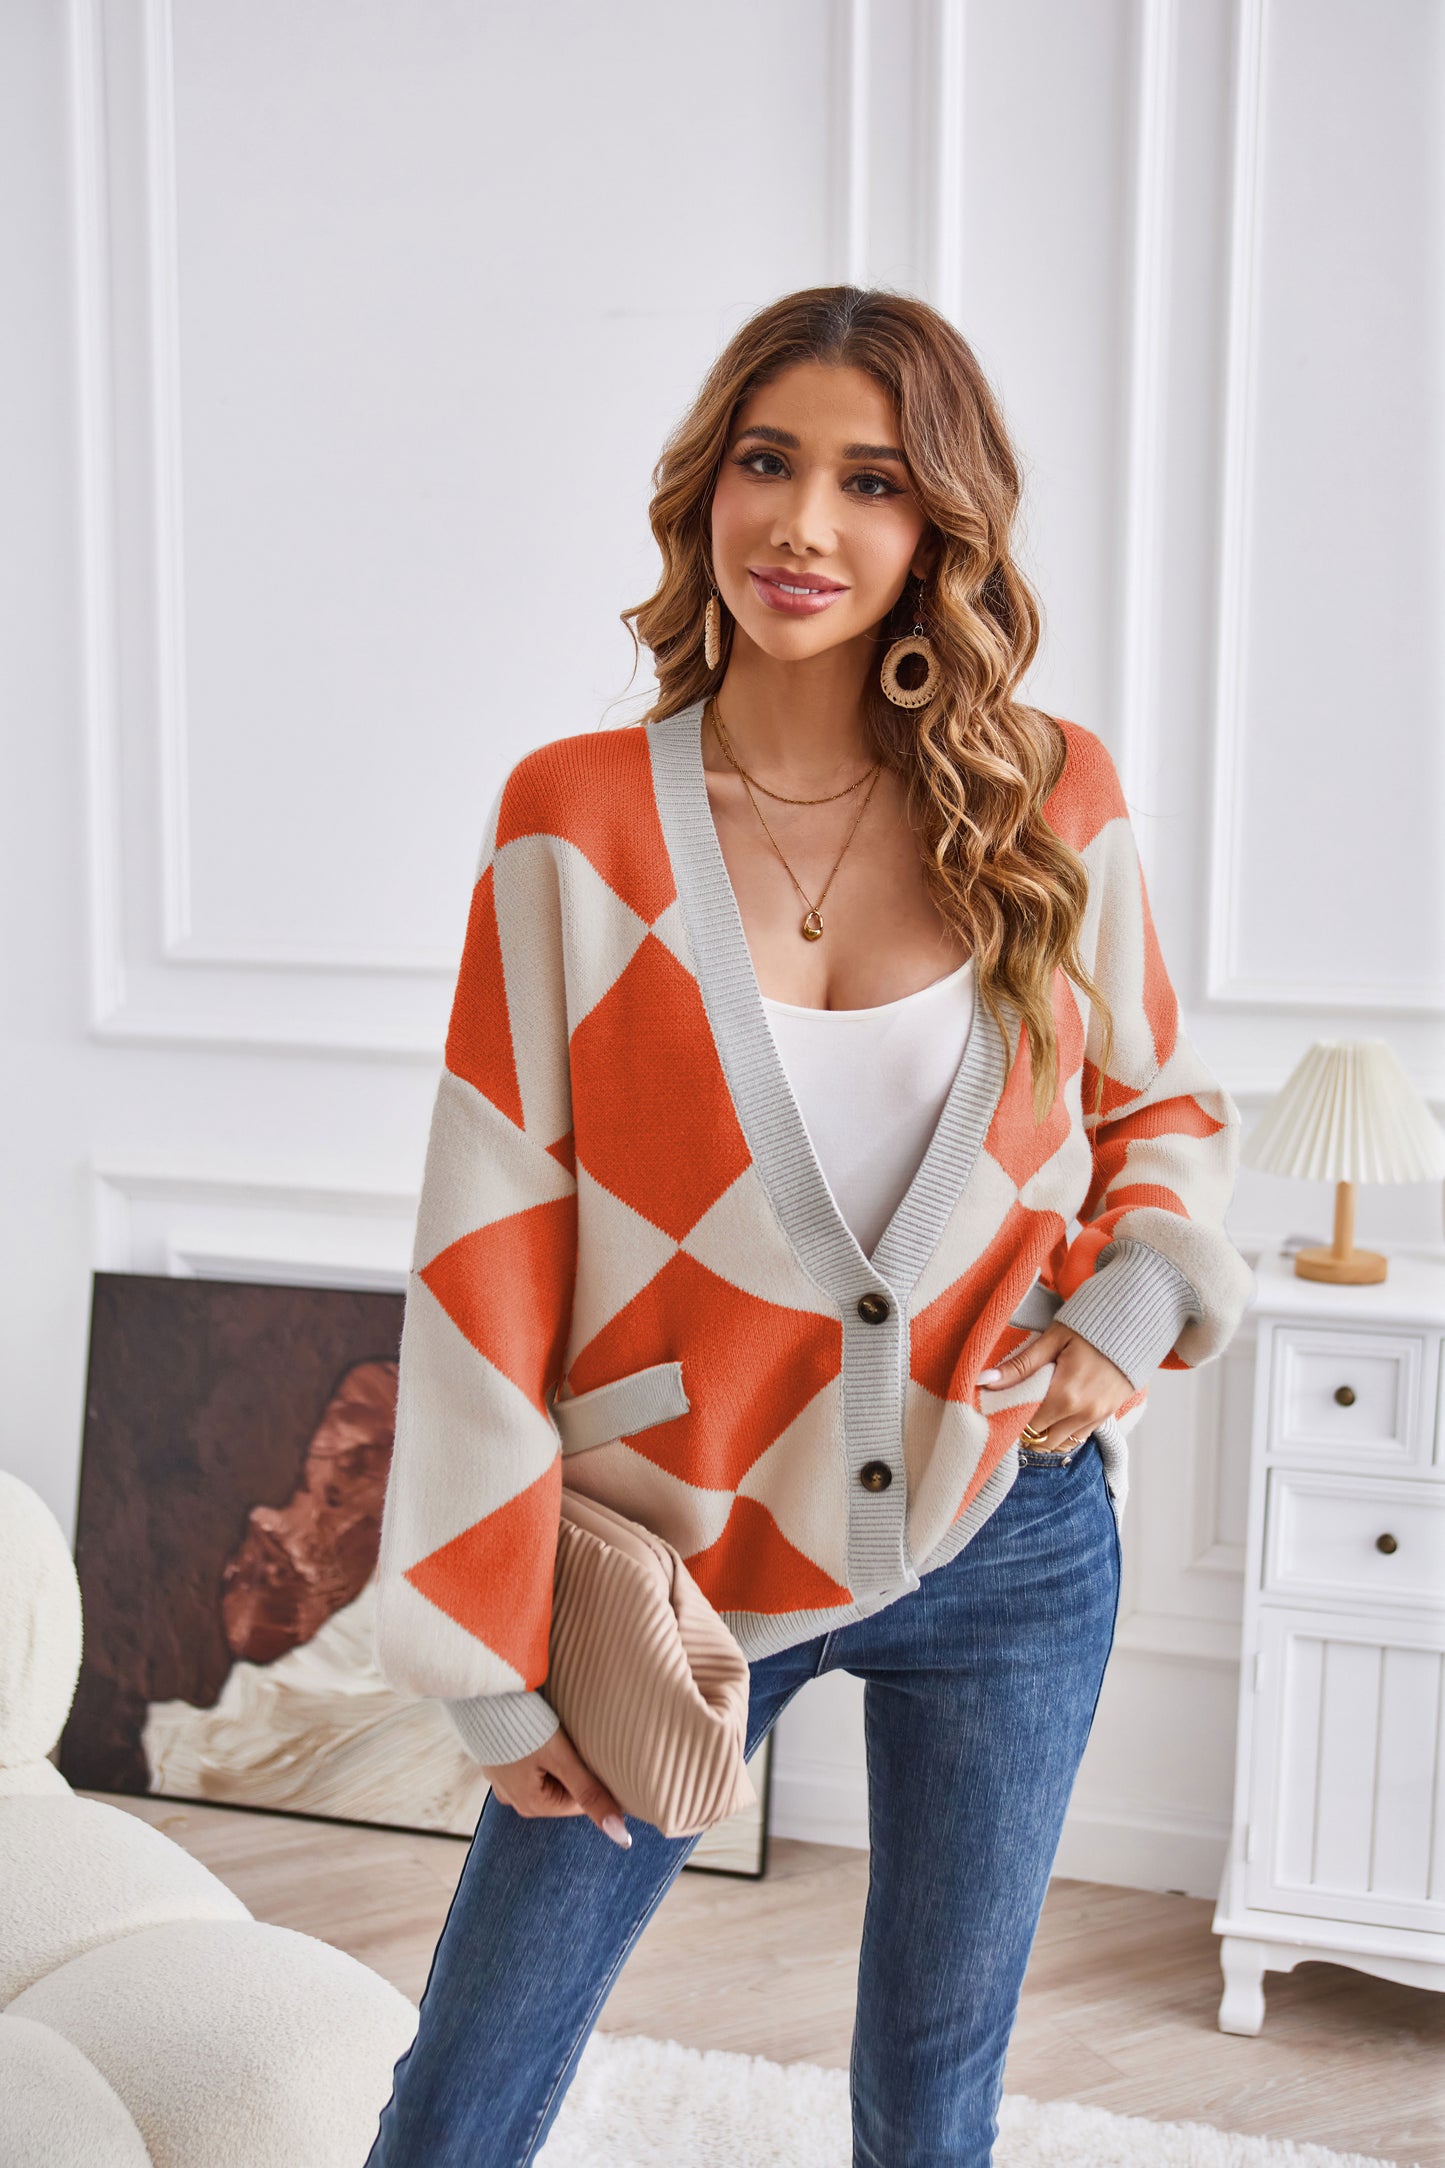 Winter V Neck Geometric Abstract Stitching Contrast Color Knitted Cardigan Casual Loose Jacket Women